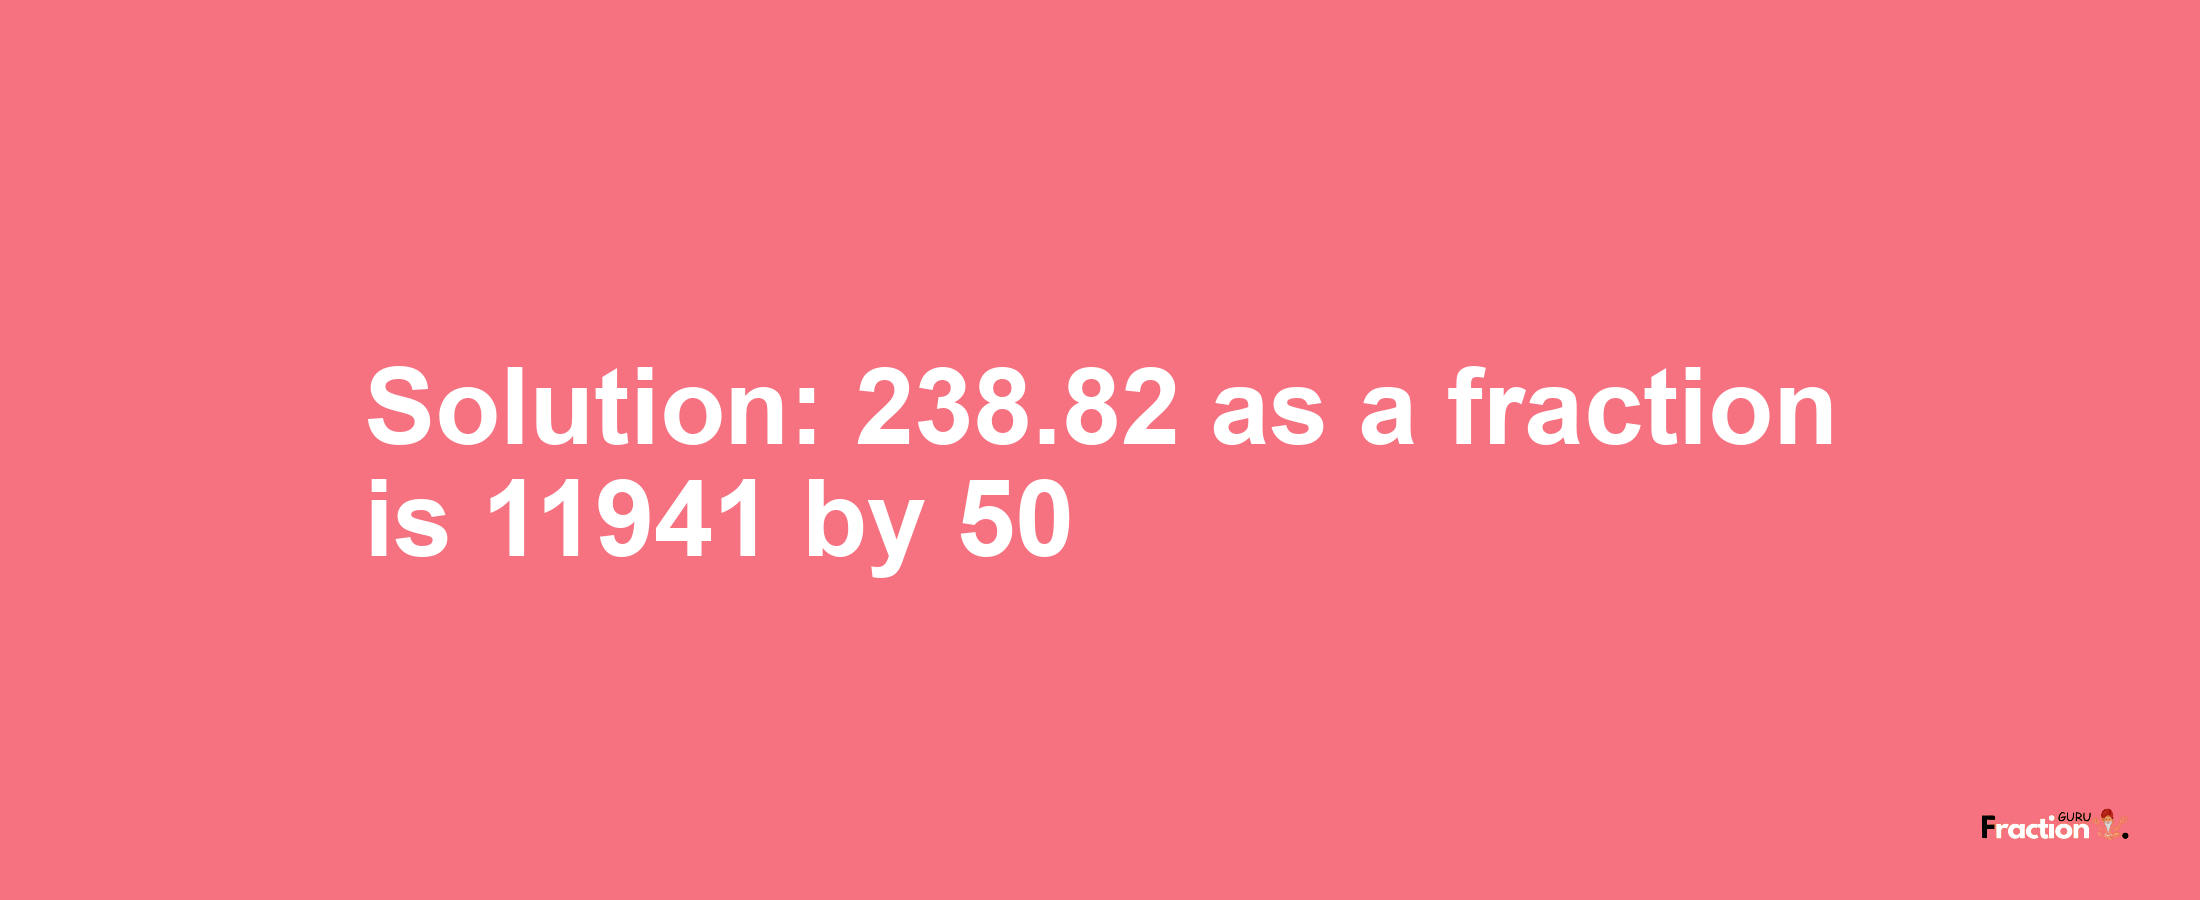 Solution:238.82 as a fraction is 11941/50